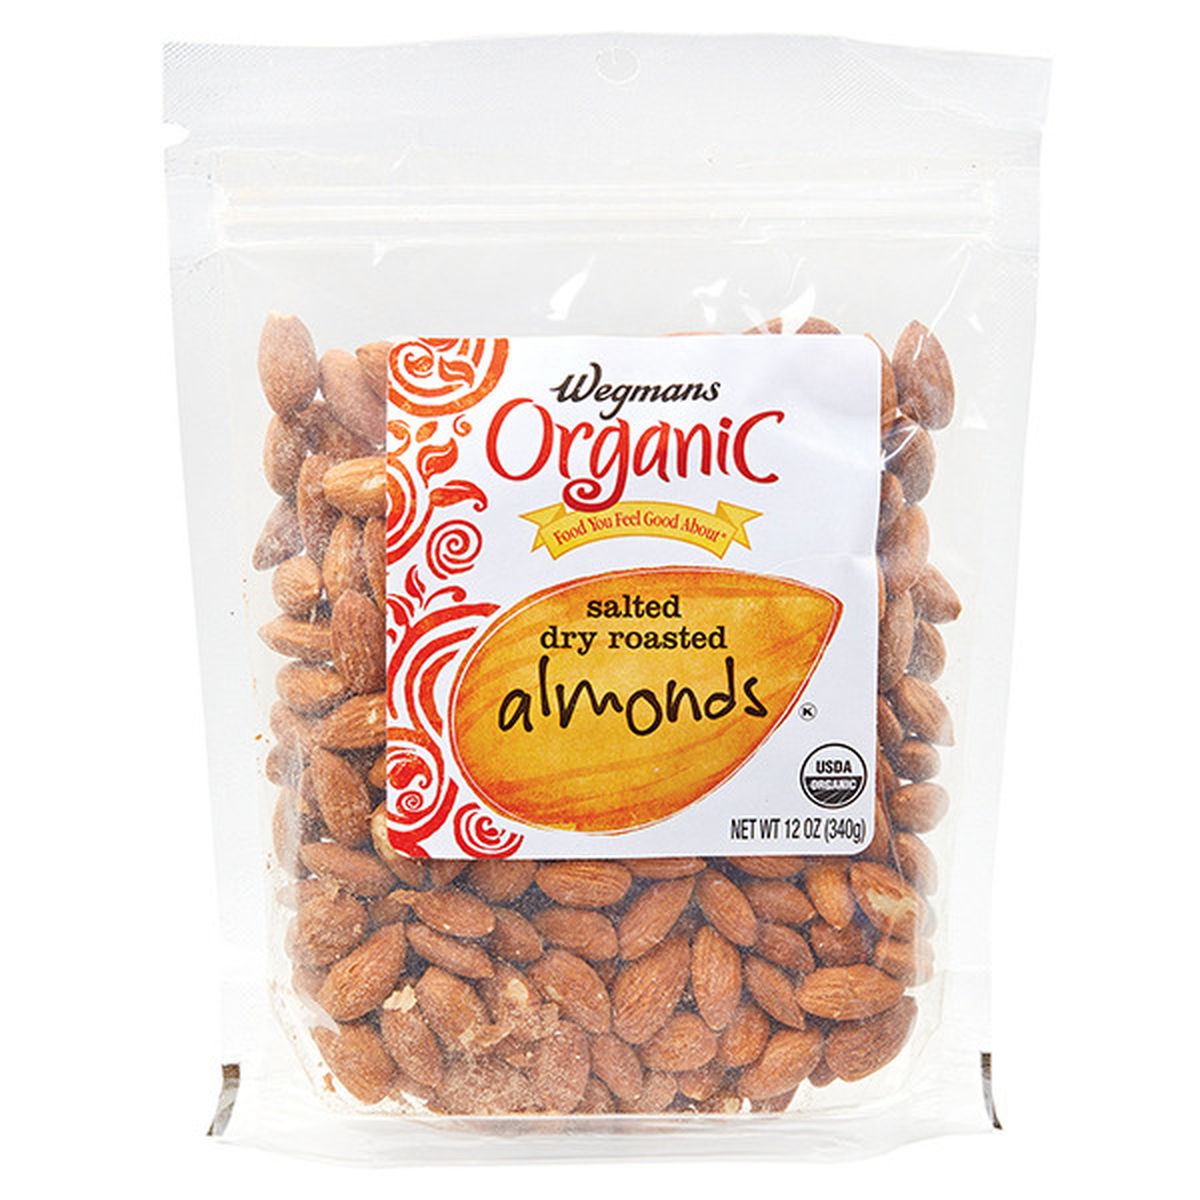 Calories in Wegmans Organic Salted Dry Roasted Almonds